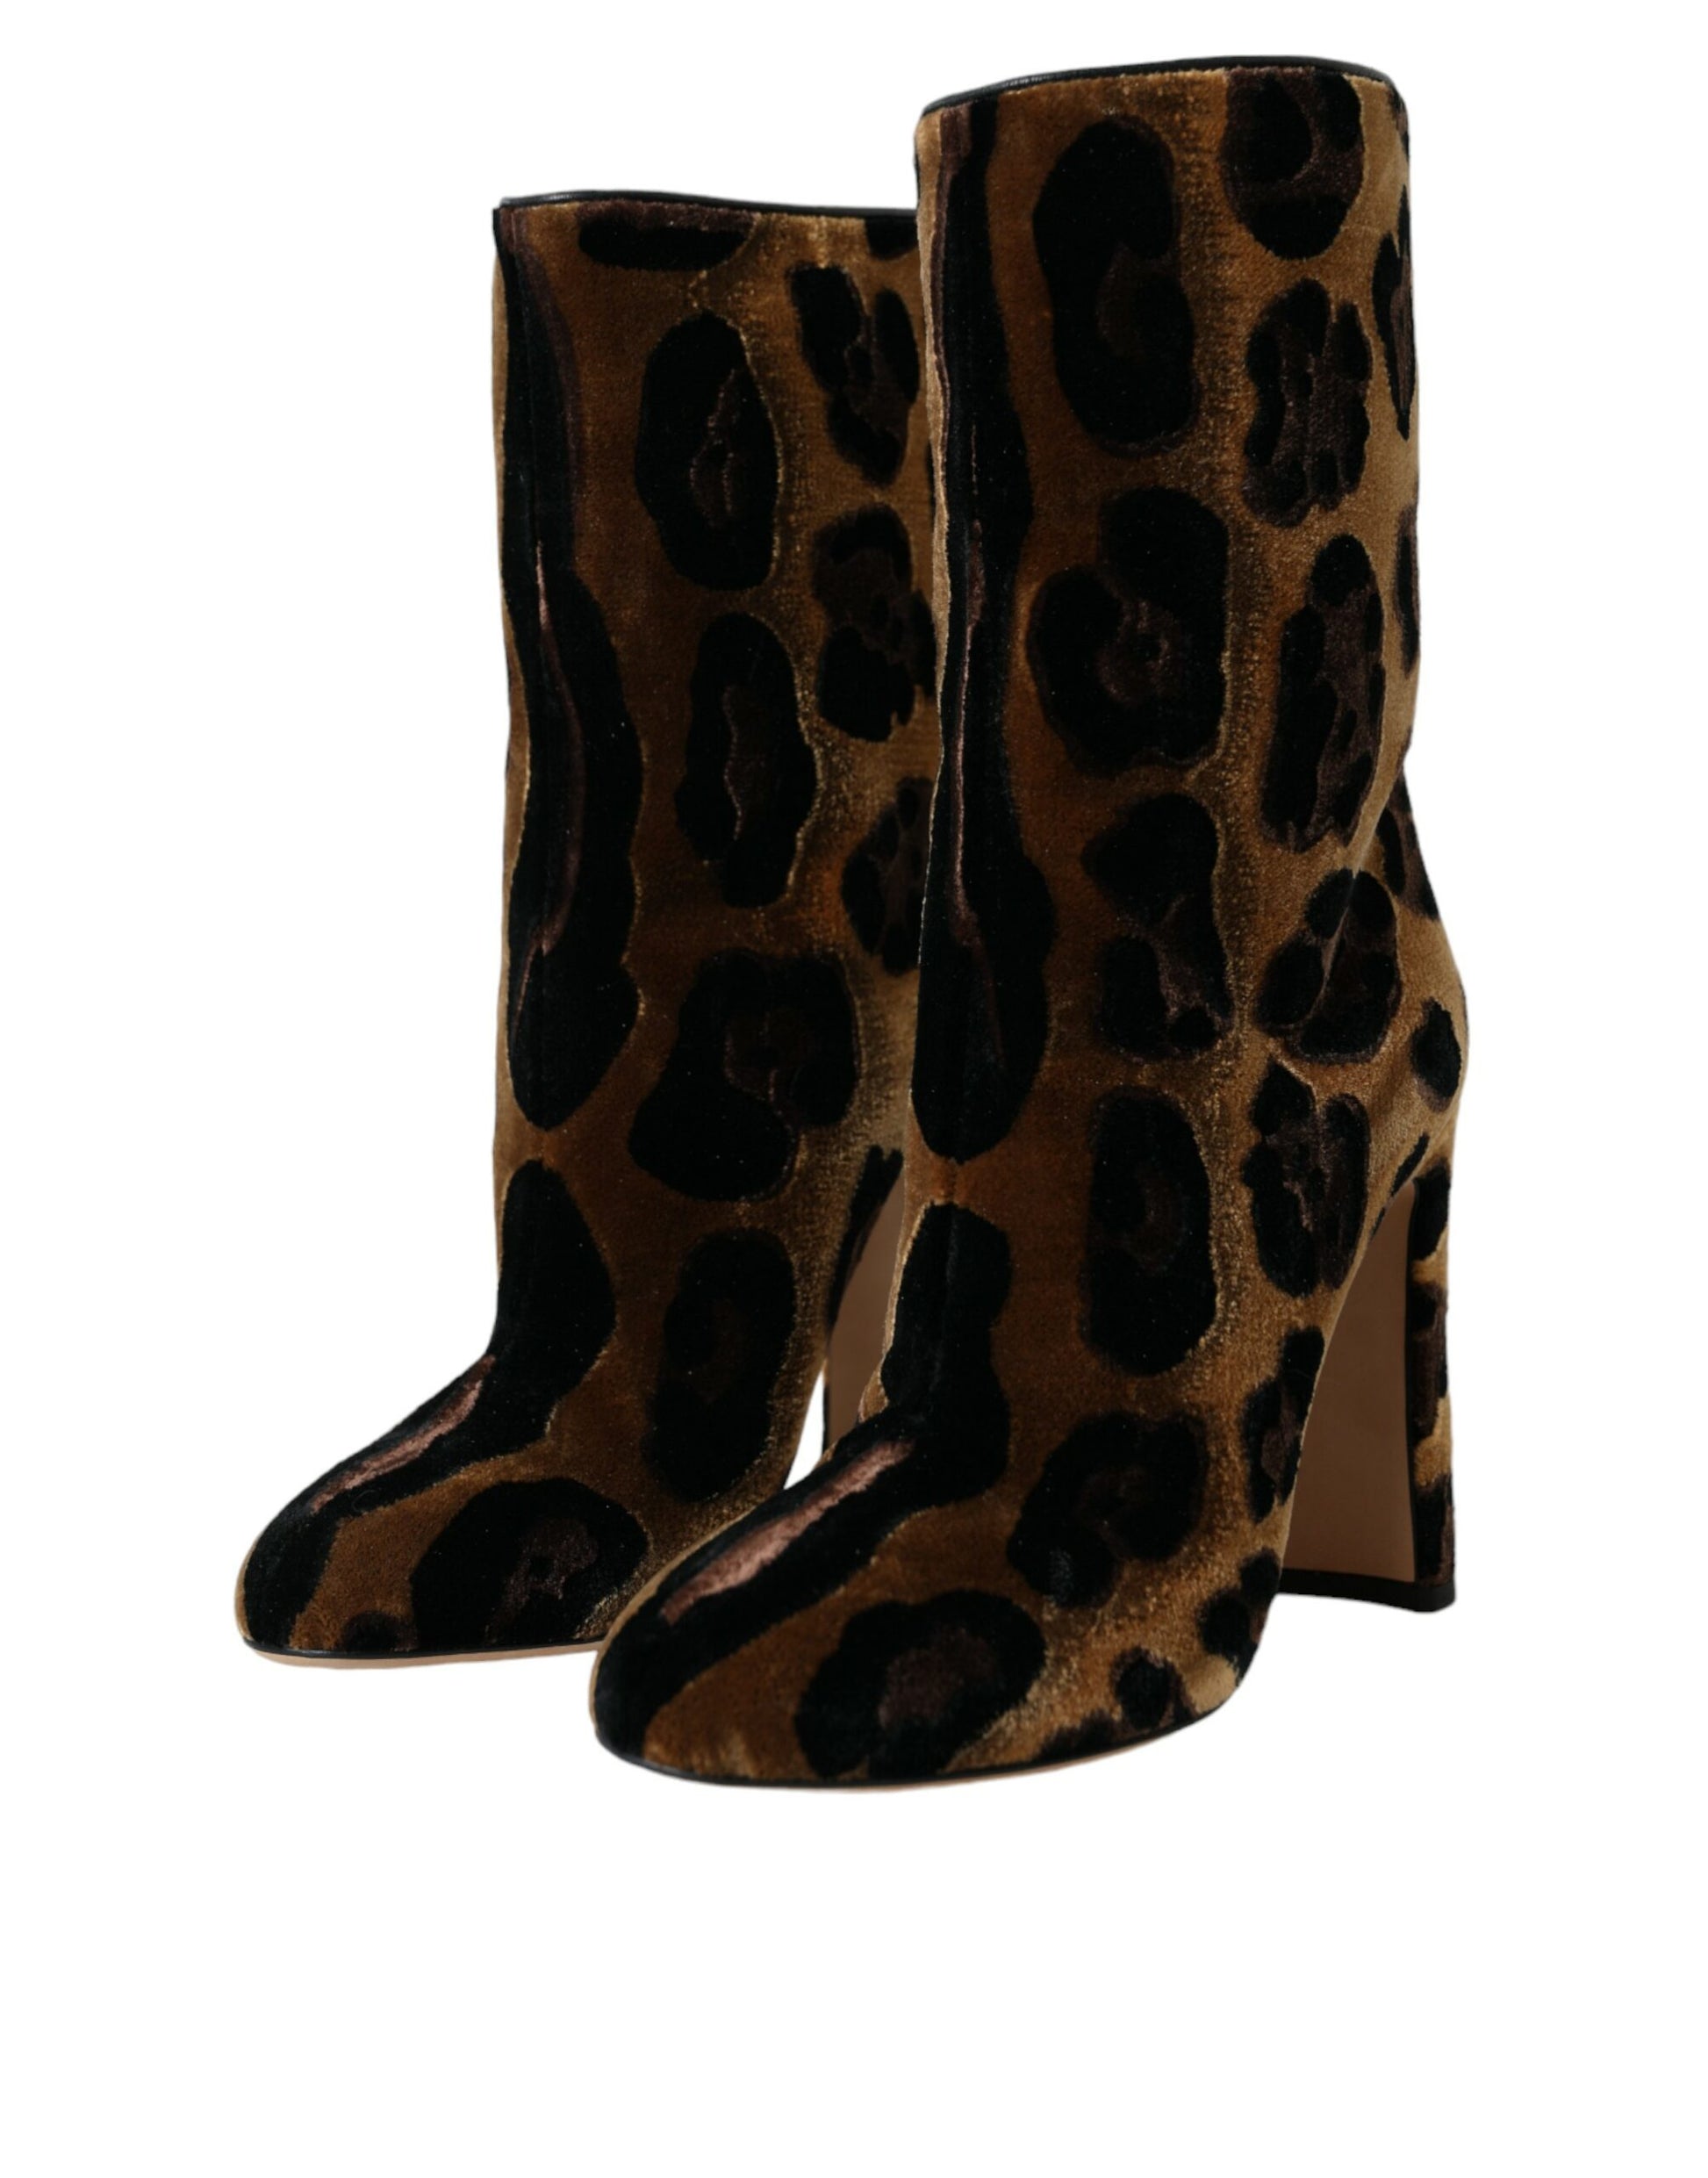 Brown Giraffe Leather Mid Calf Boots Shoes